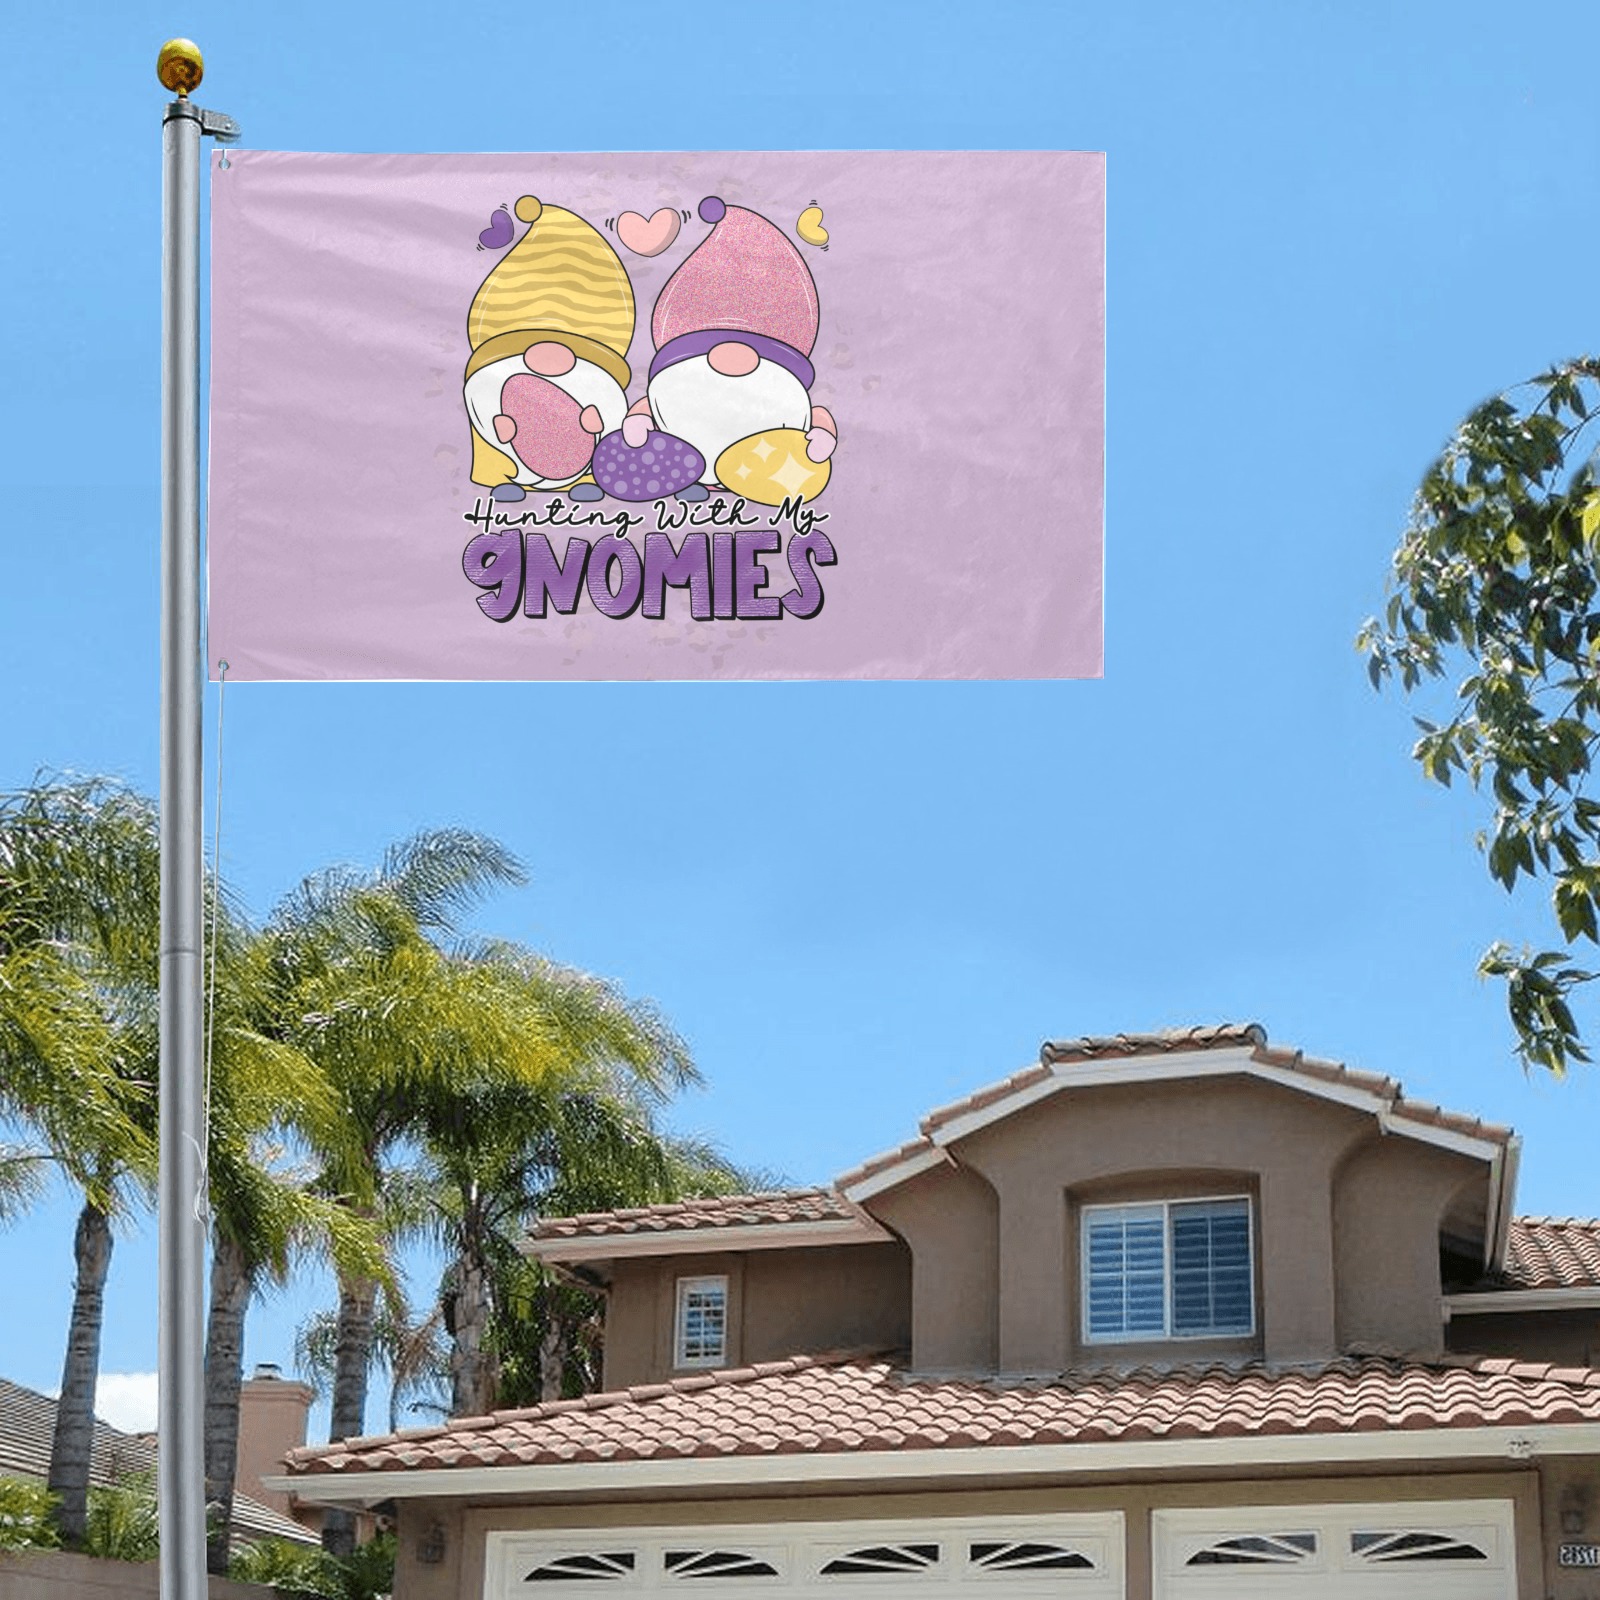 Easter Egg Hunting With My Gnomes Garden Flag 59"x35"